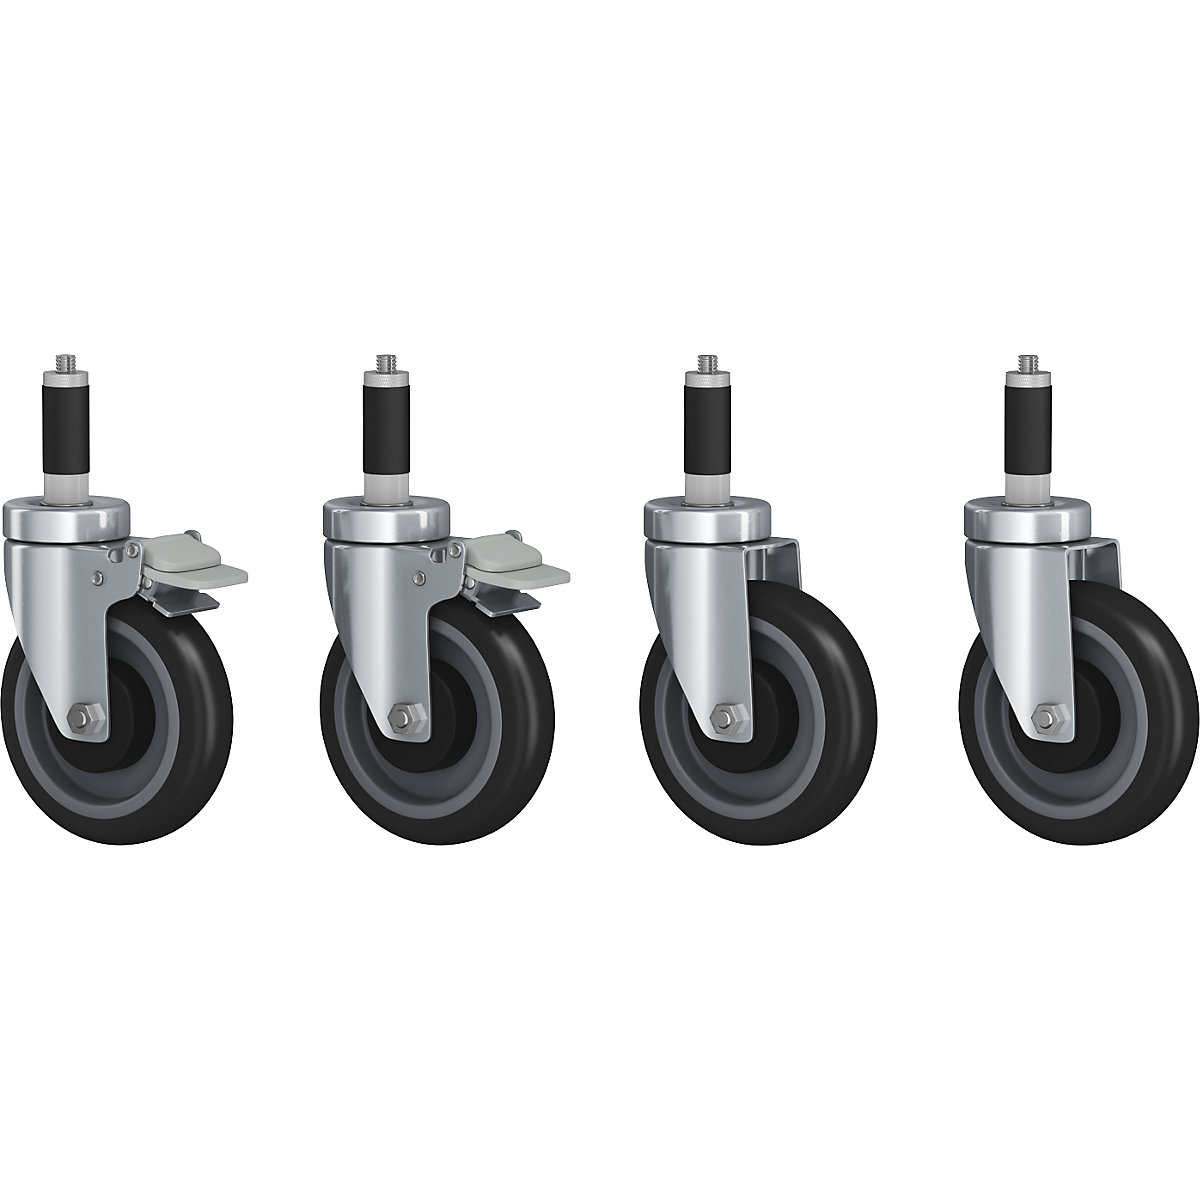 Set of swivel castors with stops and without stops